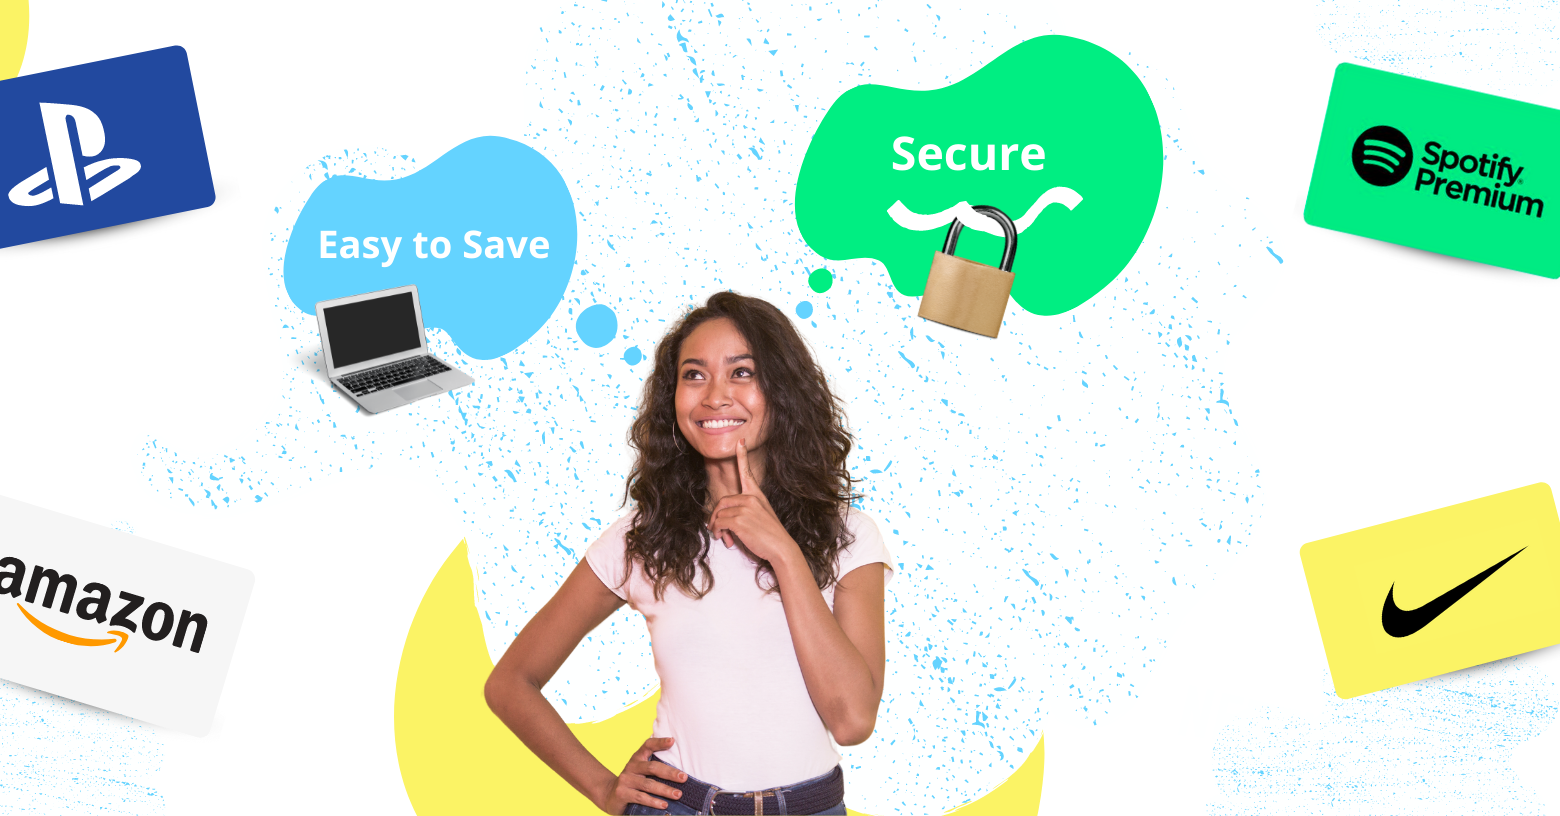 Image with happy girl thinking about Easy to save and Secure features of Digital Gift Cards